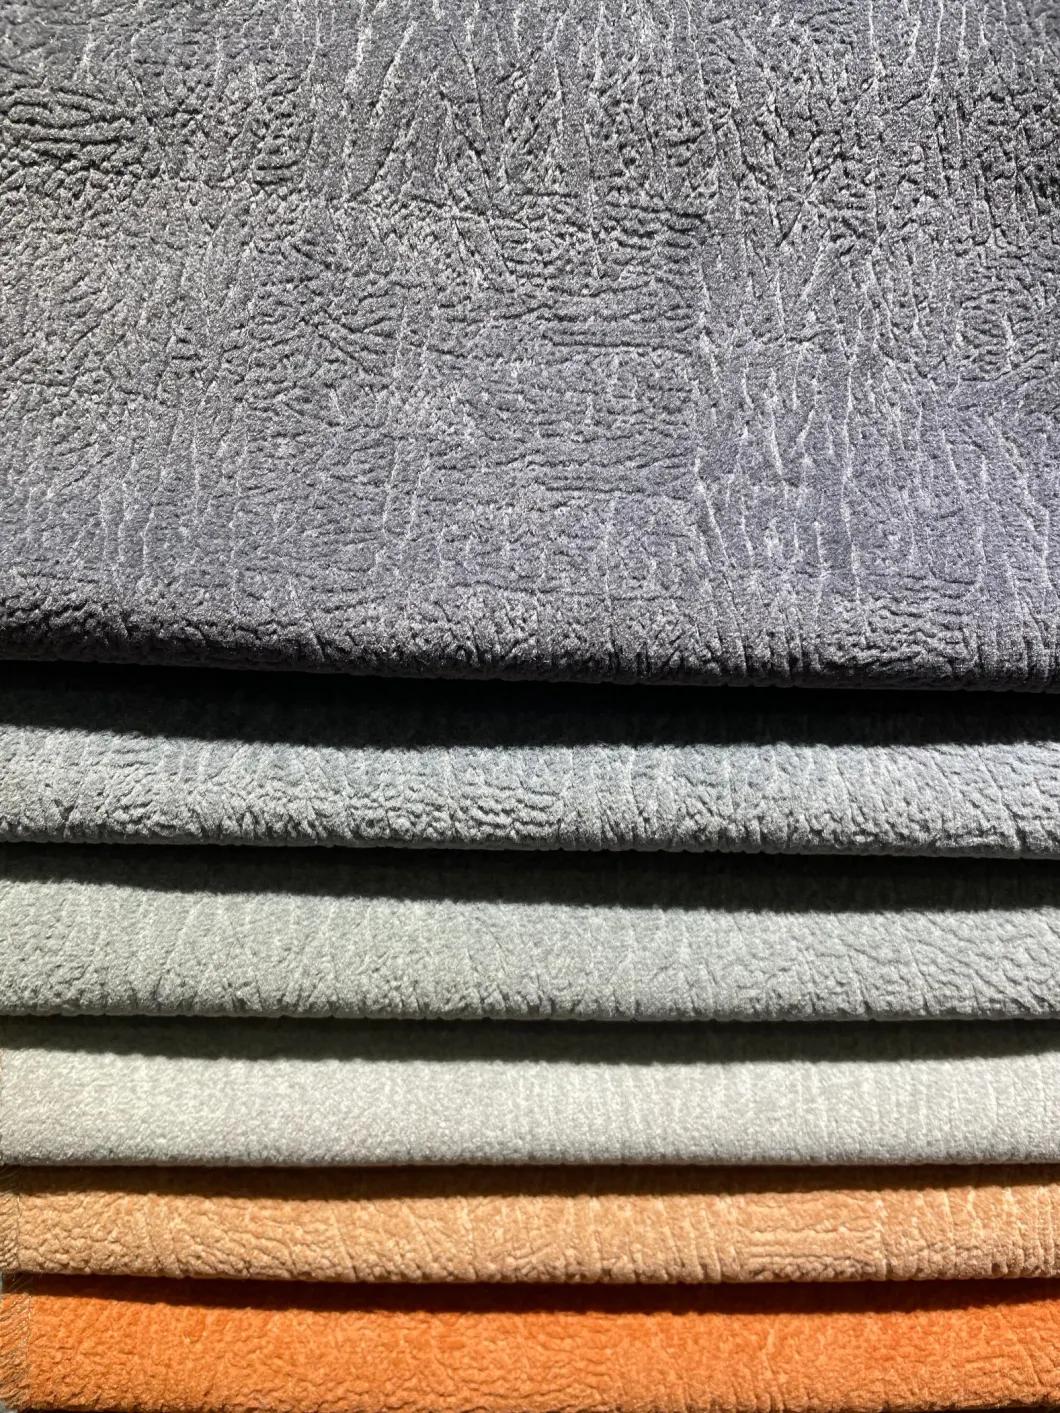 China 100%Polyester Fleece Linen Velvet Velboa Fabric Ready Goods Couch Sofa Fabric Furniture Fabric Upholstery Fabric (WS2037)